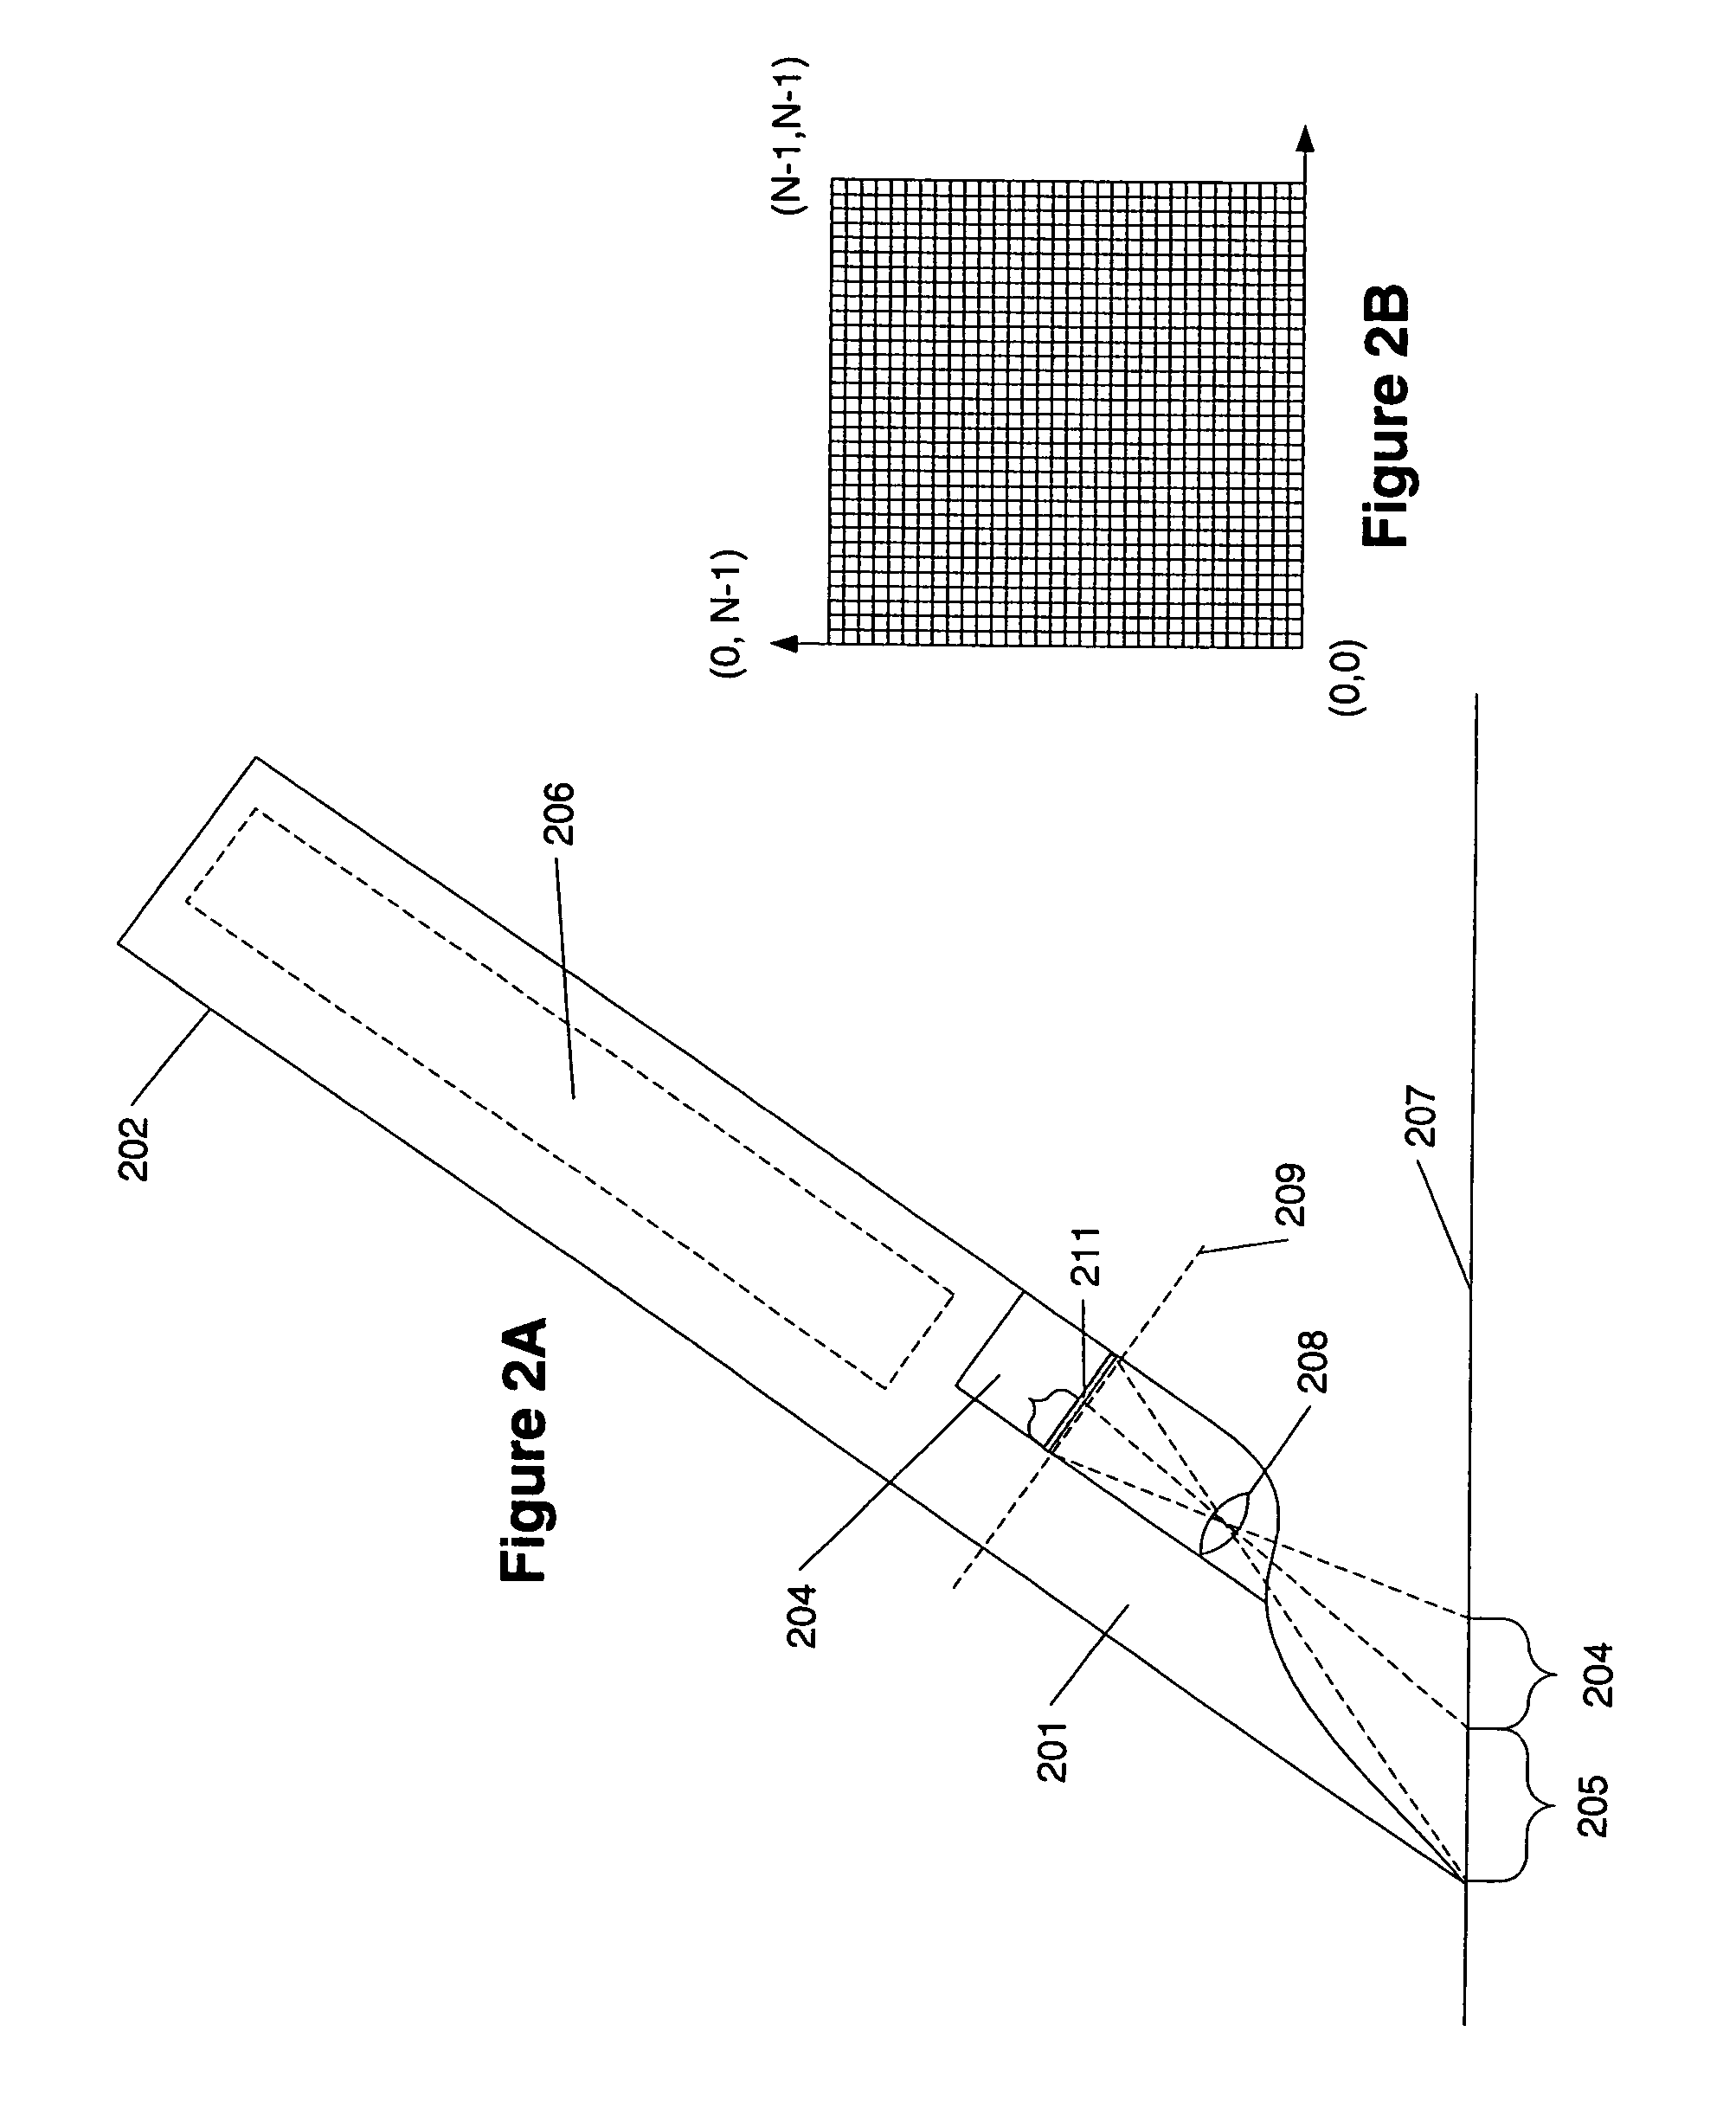 Stroke localization and binding to electronic document